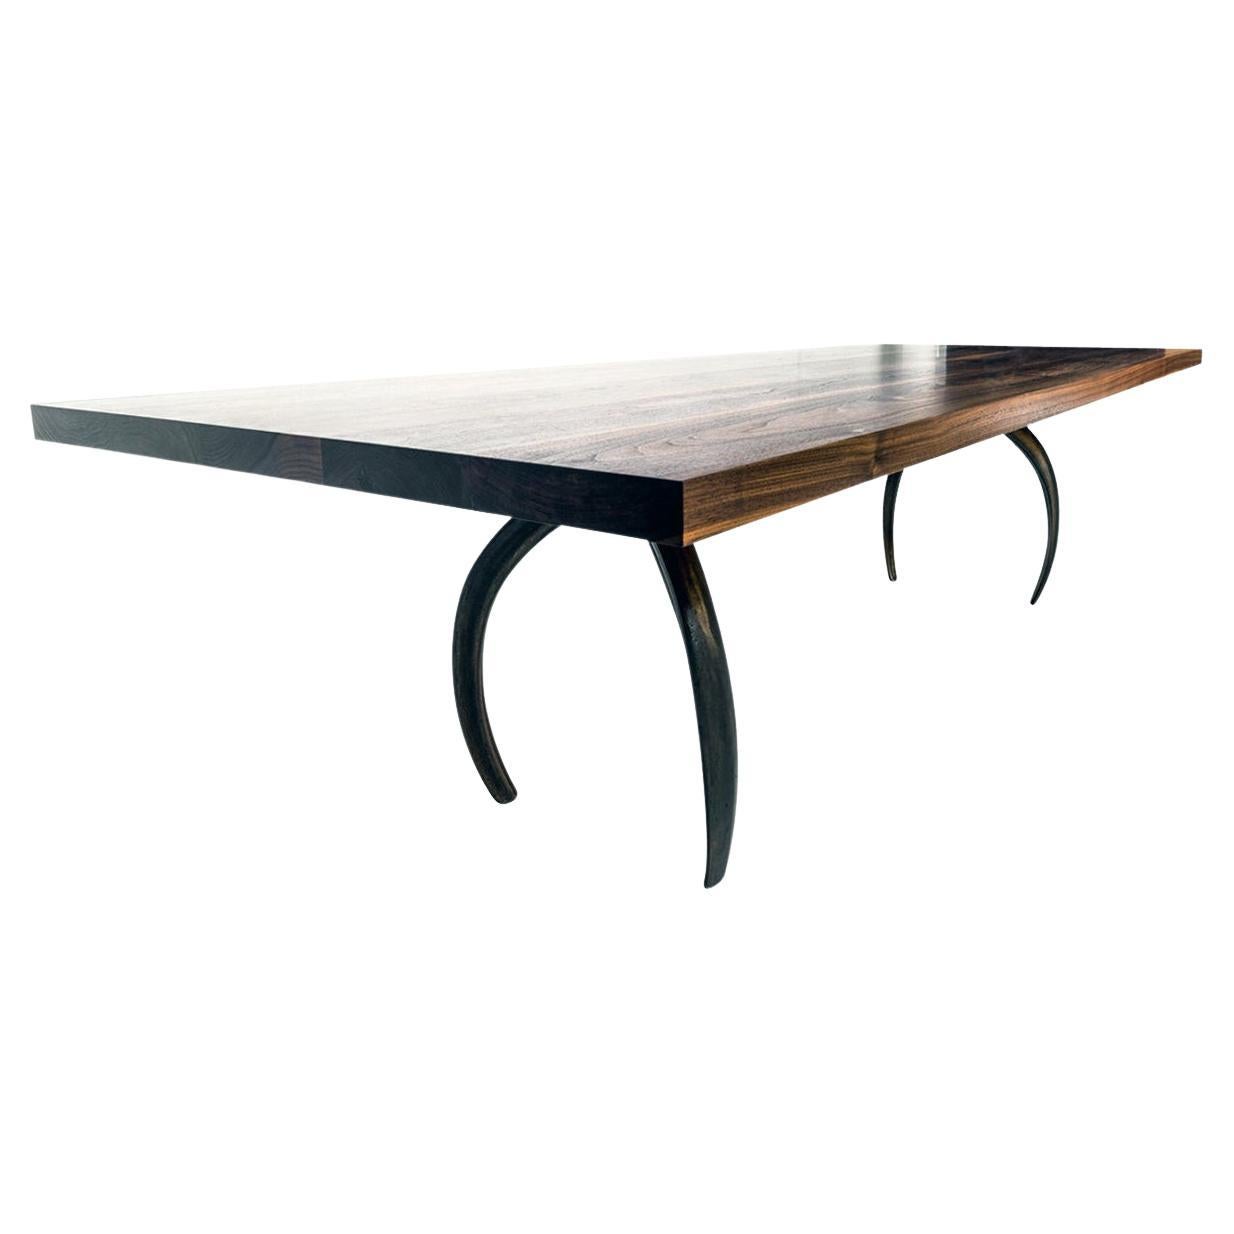 Stacklab Wishbone - 8 Seat Dining Table, Joined Hardwood with Cast-Metal For Sale